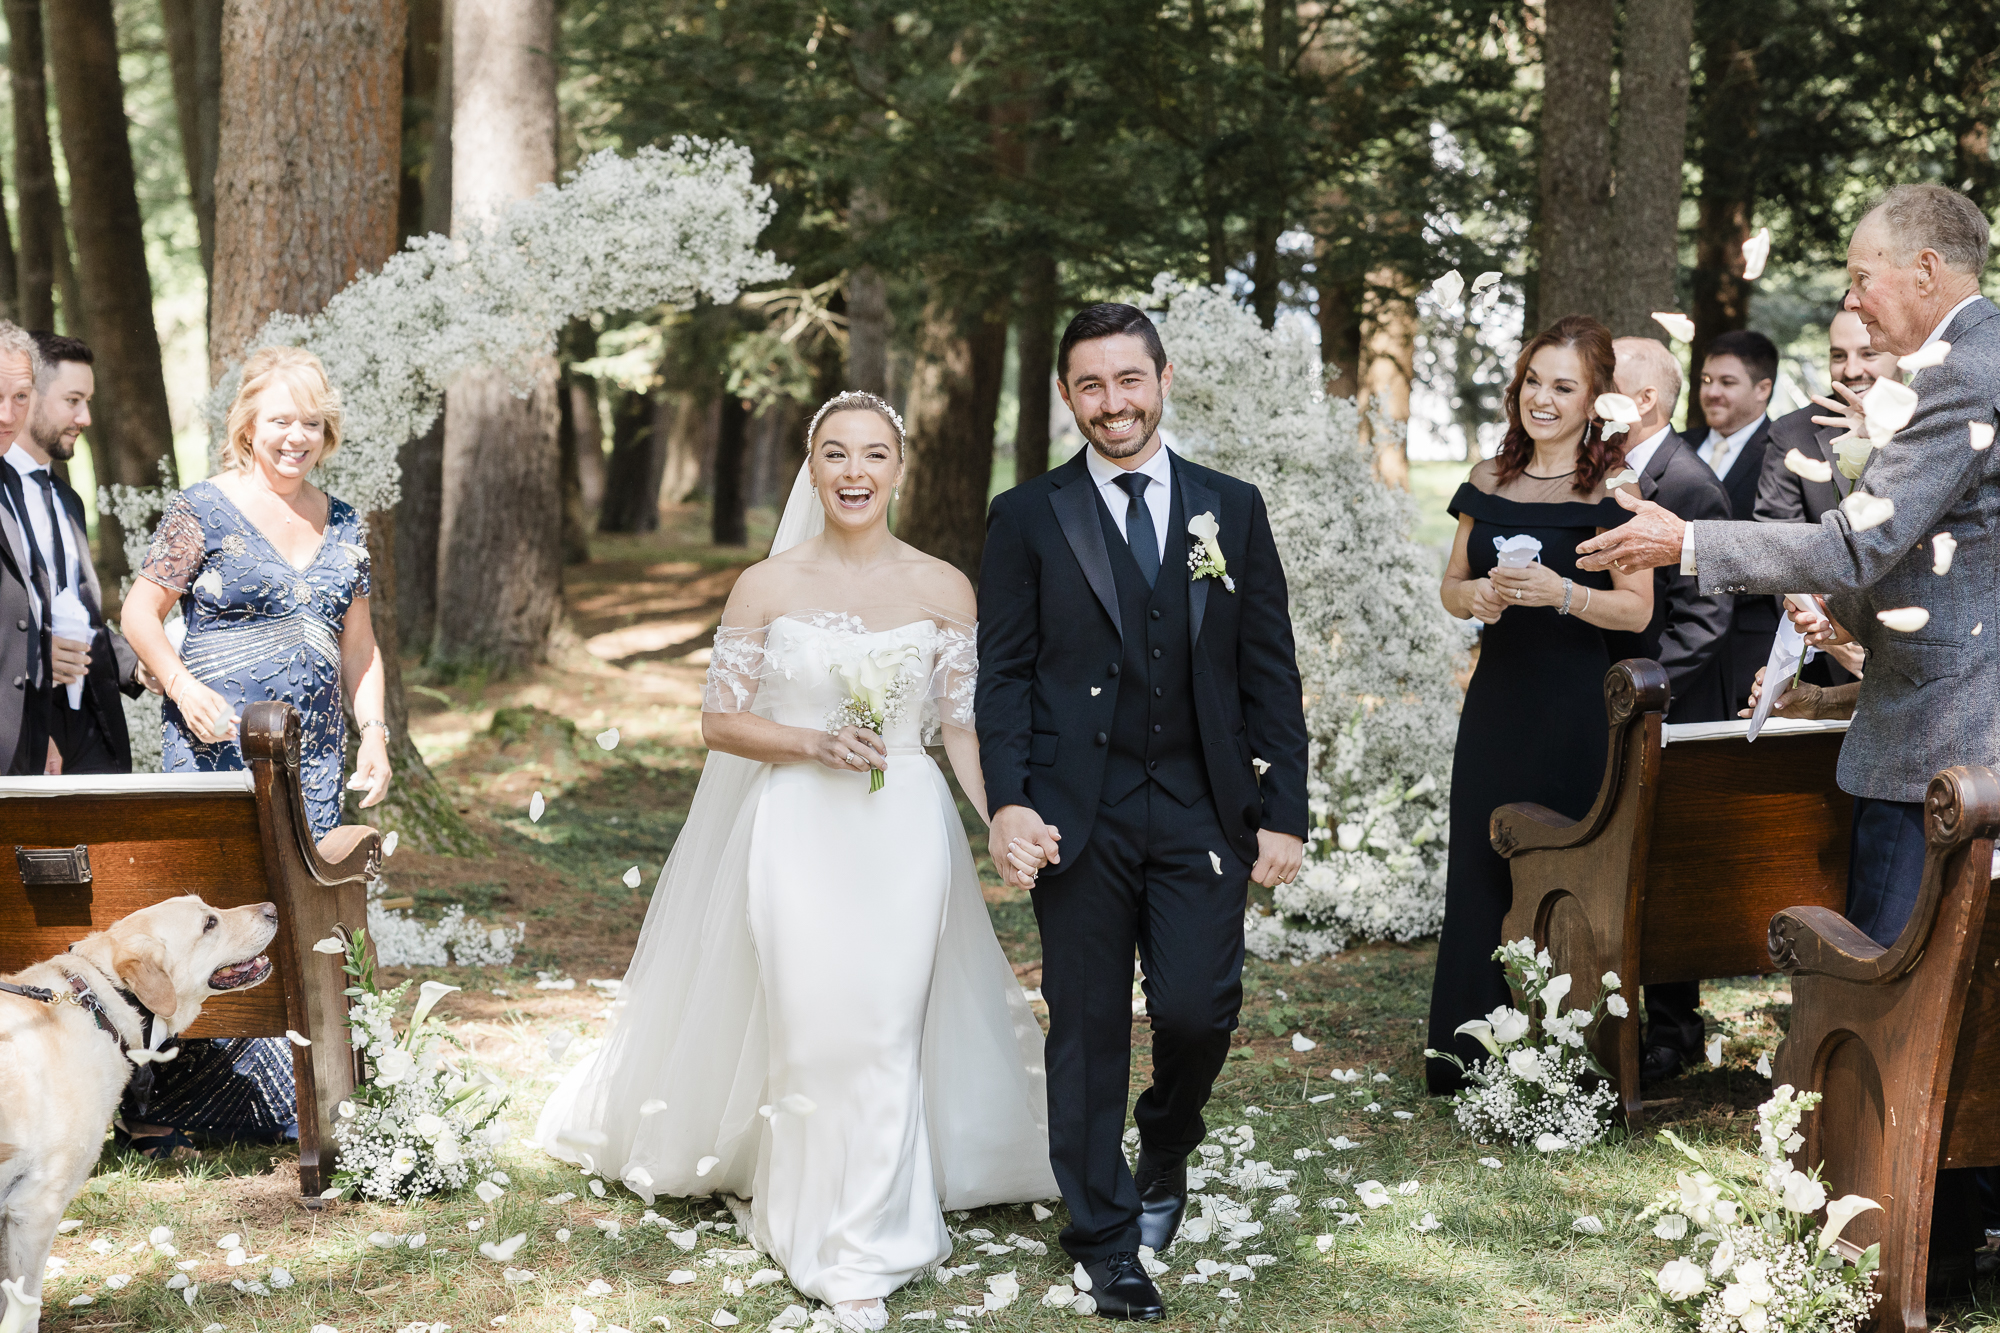 Bride and groom exit their wedding ceremony in a hemlock grove